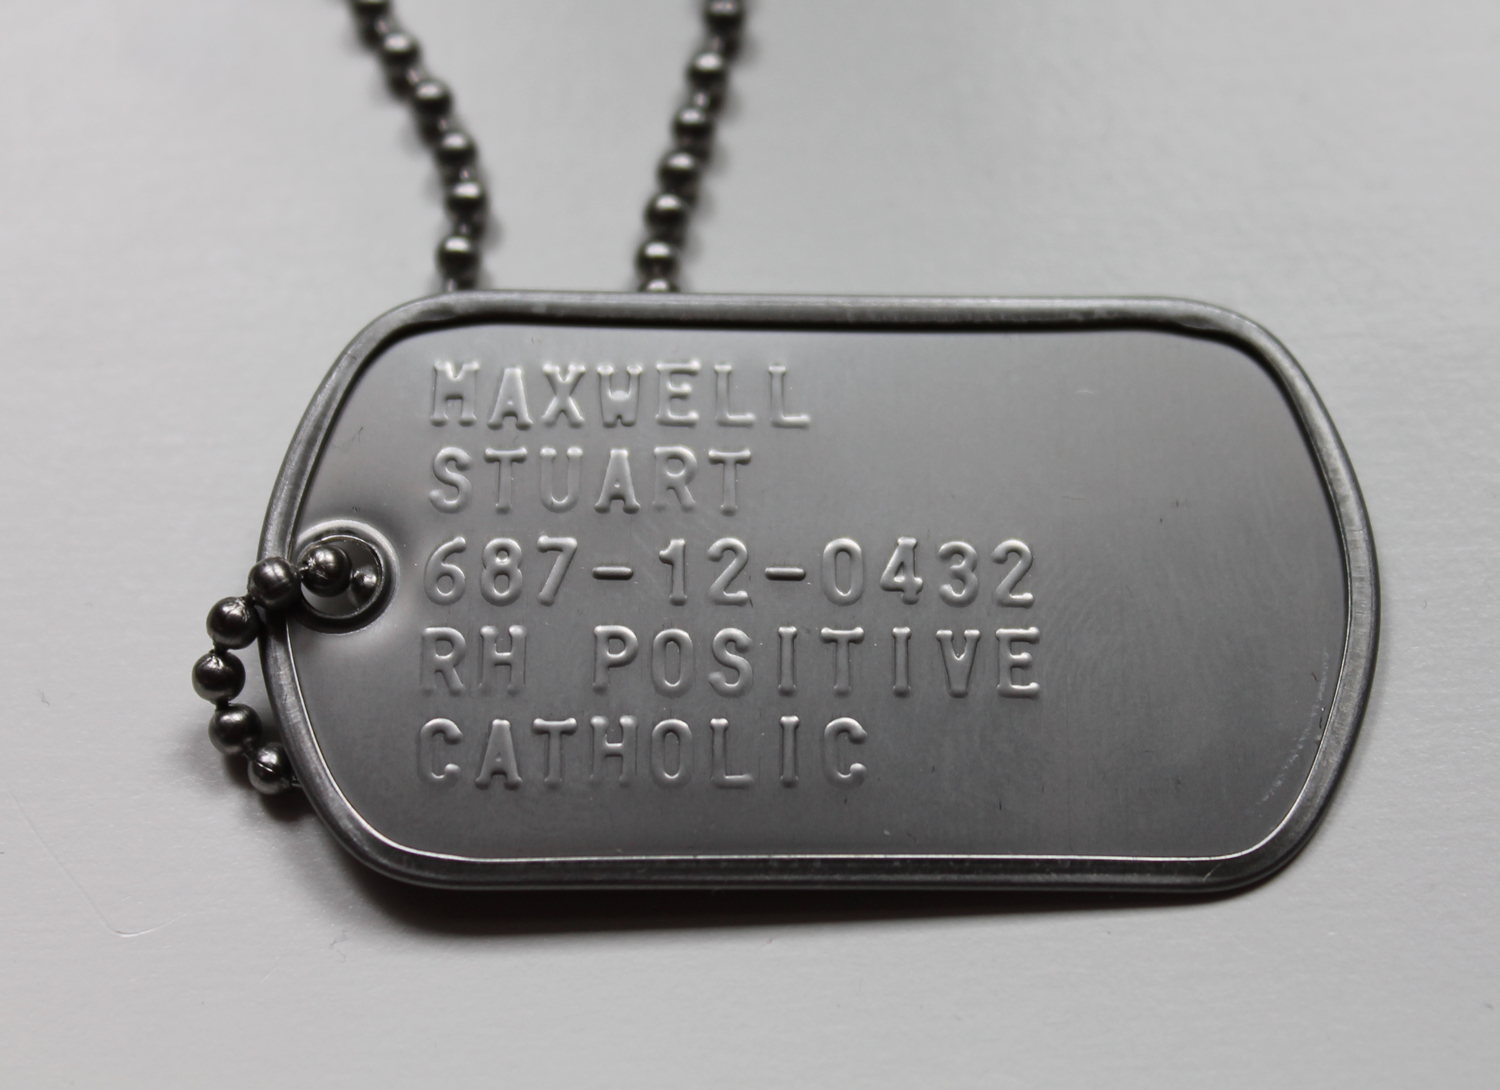 What information should be on a dog tag